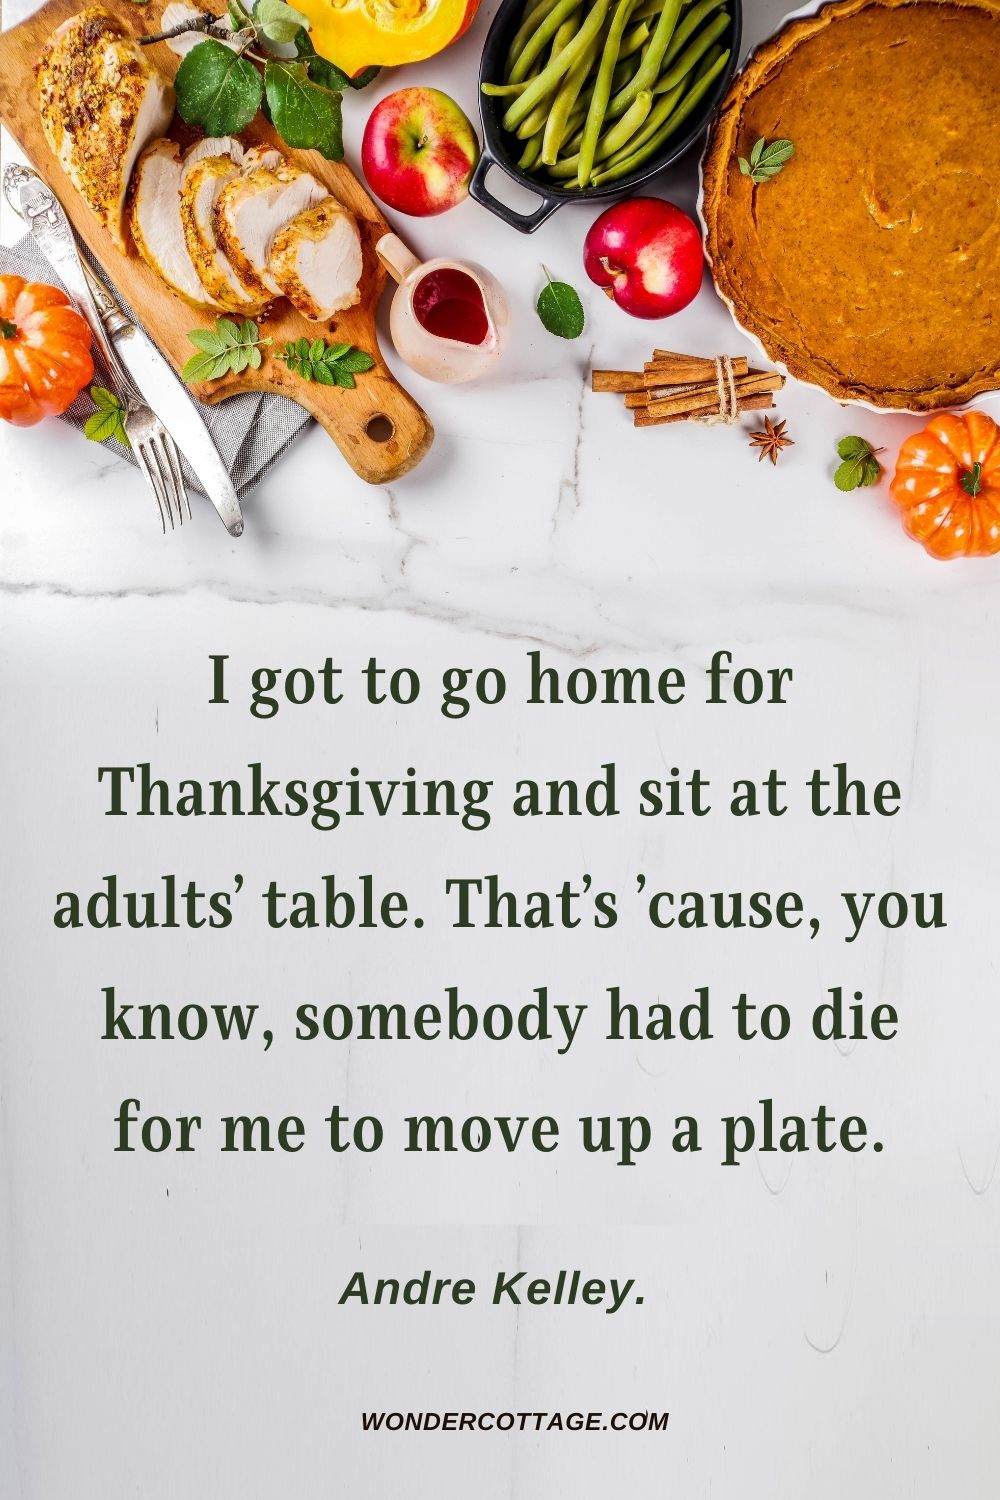 I got to go home for Thanksgiving and sit at the adults’ table. That’s ’cause, you know, somebody had to die for me to move up a plate. Andre Kelley. 